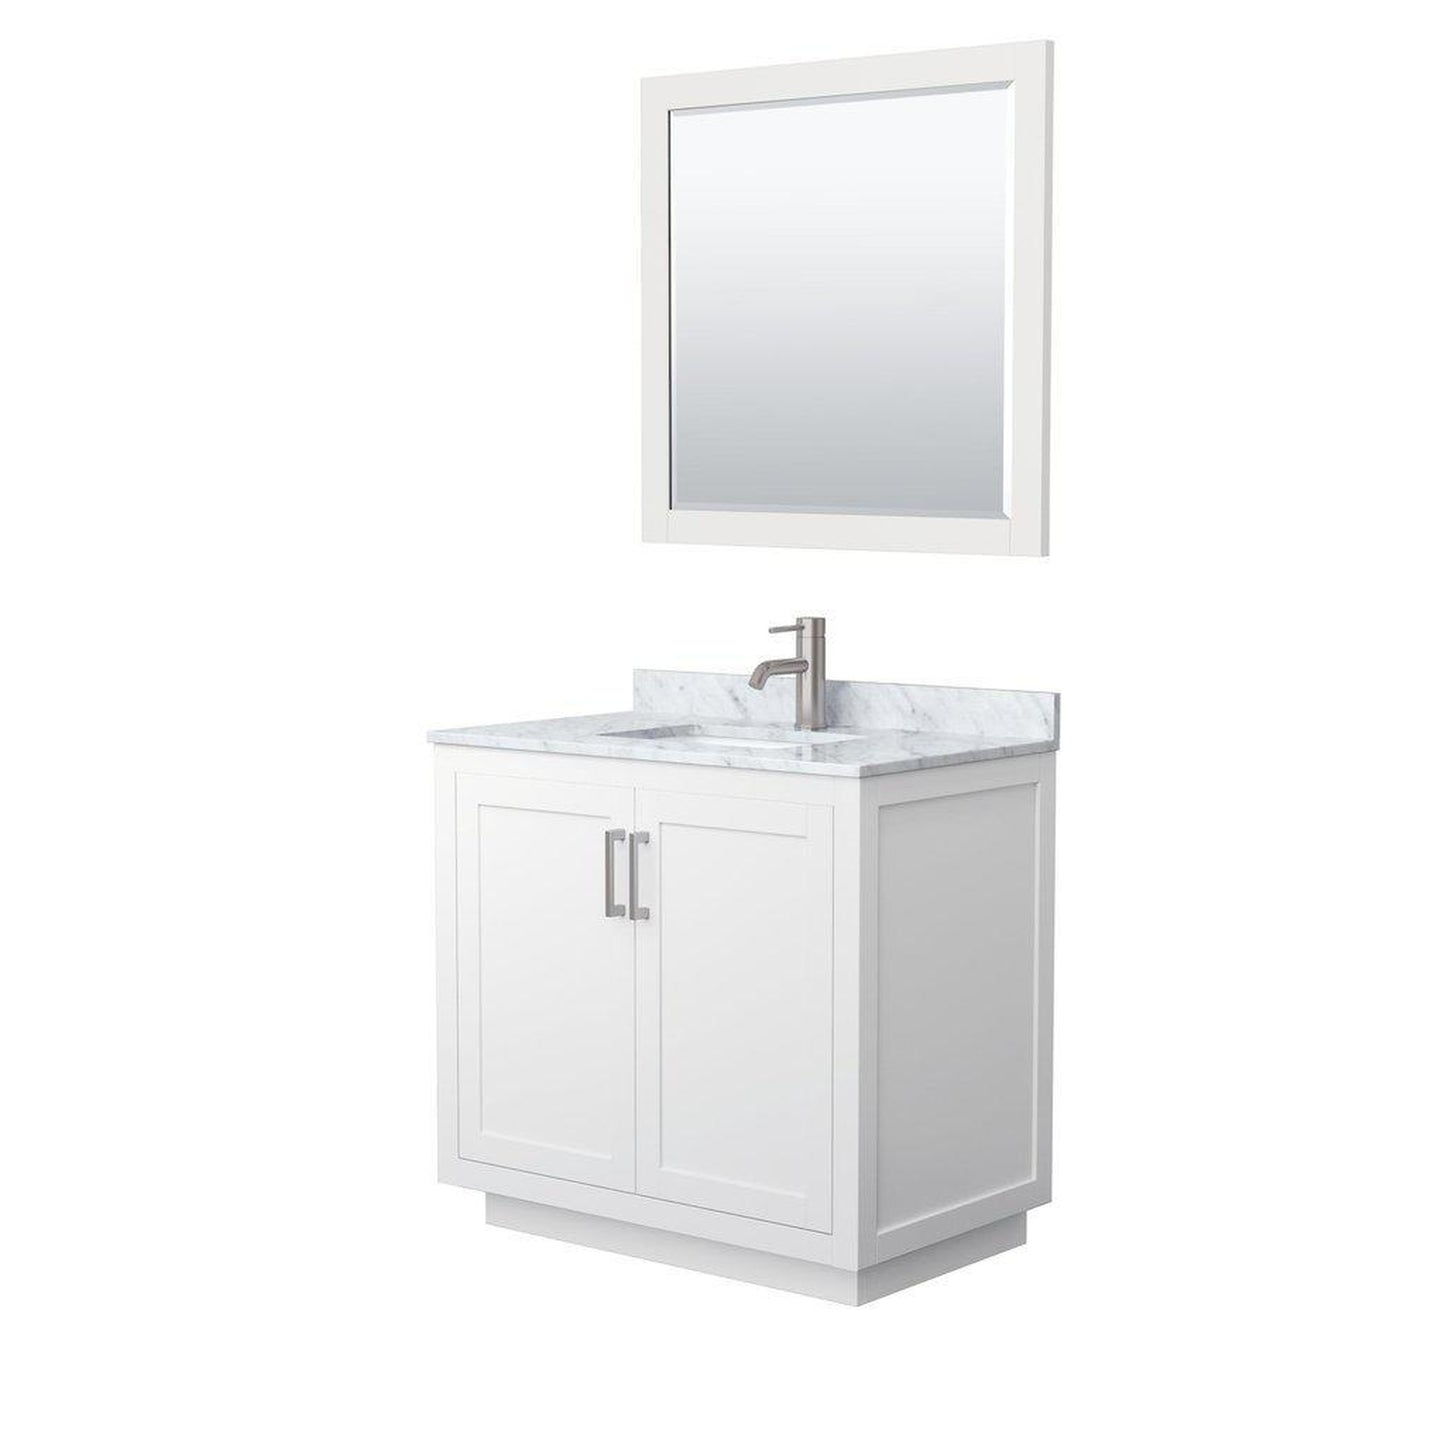 Wyndham Collection Miranda 36" Single Bathroom White Vanity Set With White Carrara Marble Countertop, Undermount Square Sink, 34" Mirror And Brushed Nickel Trim